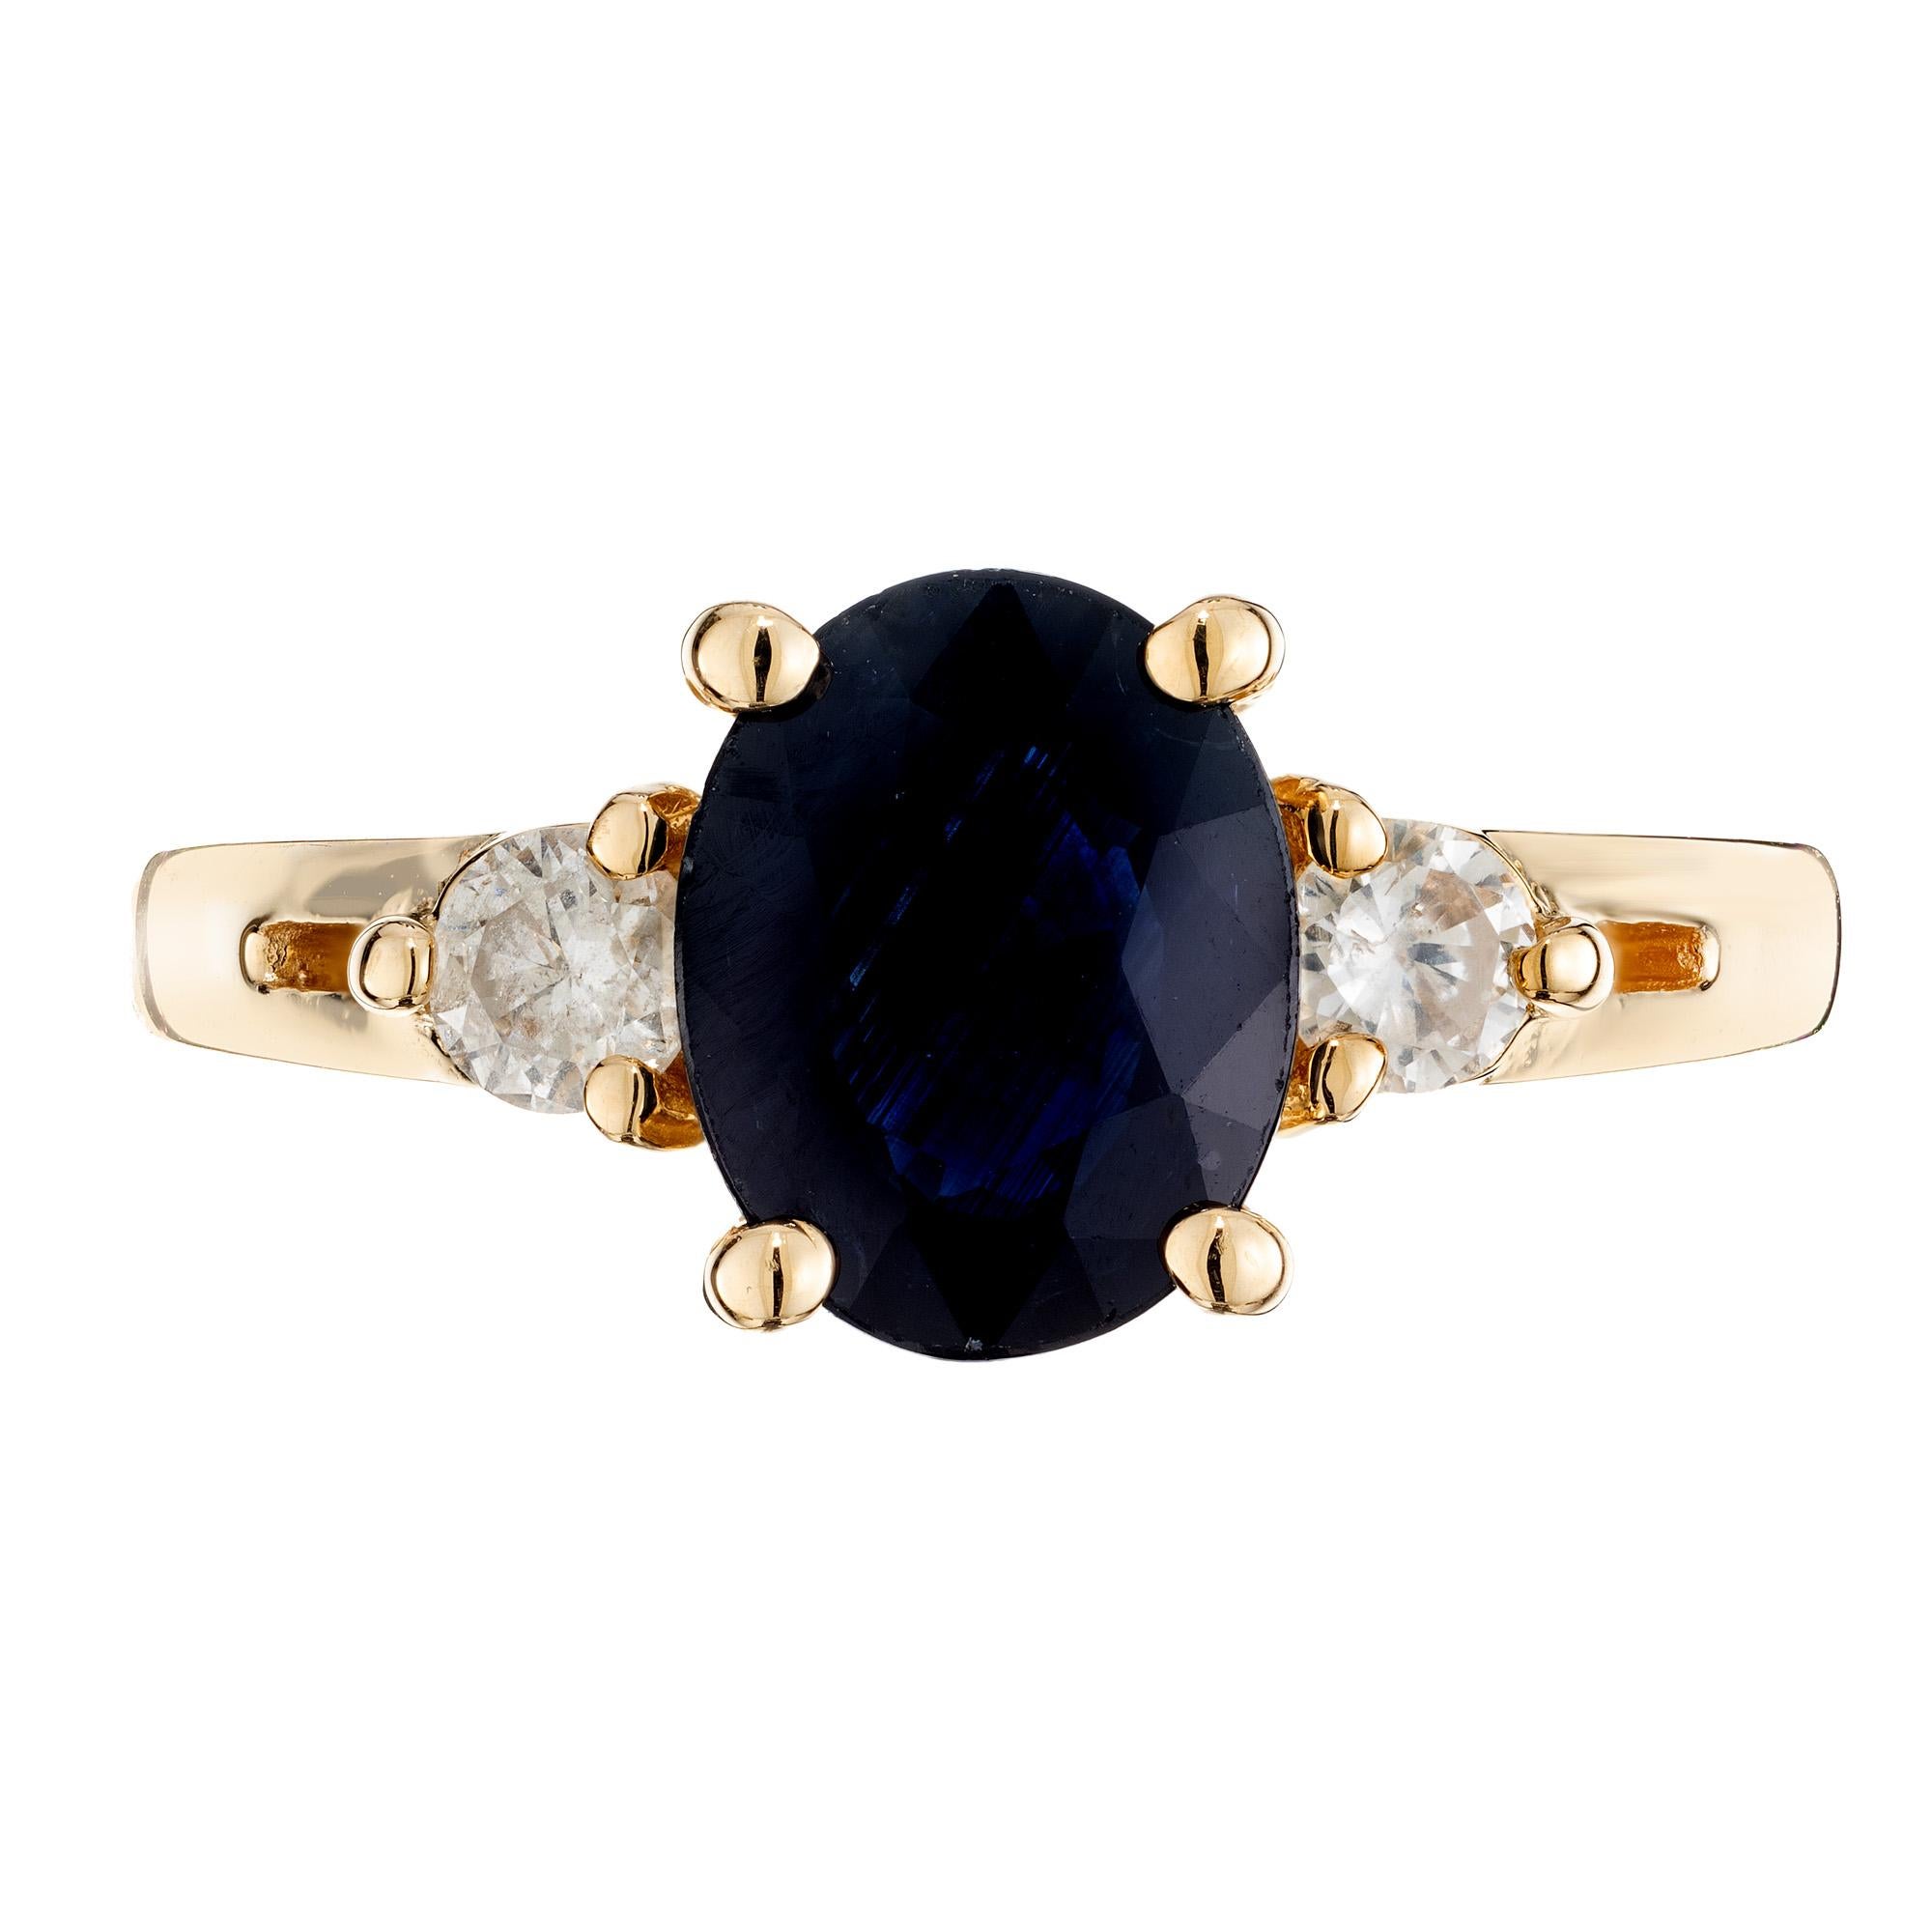 1970's Classic and simple, sapphire and diamond three-stone ring. At the center of this 14k yellow gold setting is an oval 1.50ct sapphire which is accented by two round cut diamonds. The sapphire is a rich deep blue in color and certified by the